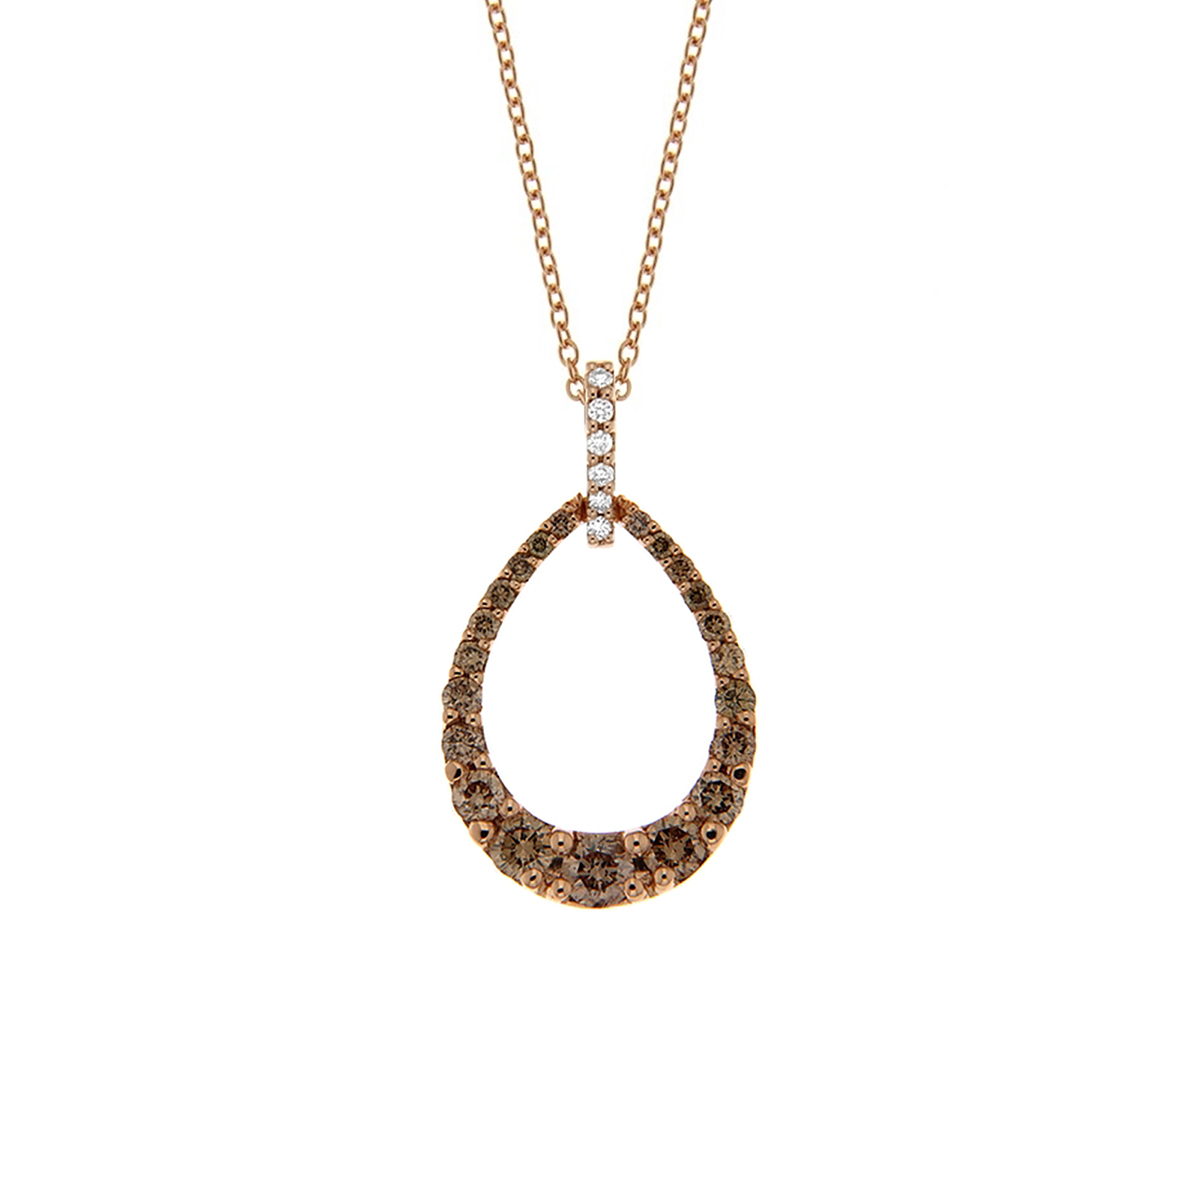 18 K Rose Gold Large Teardrop Pendant with White and Brown Diamonds